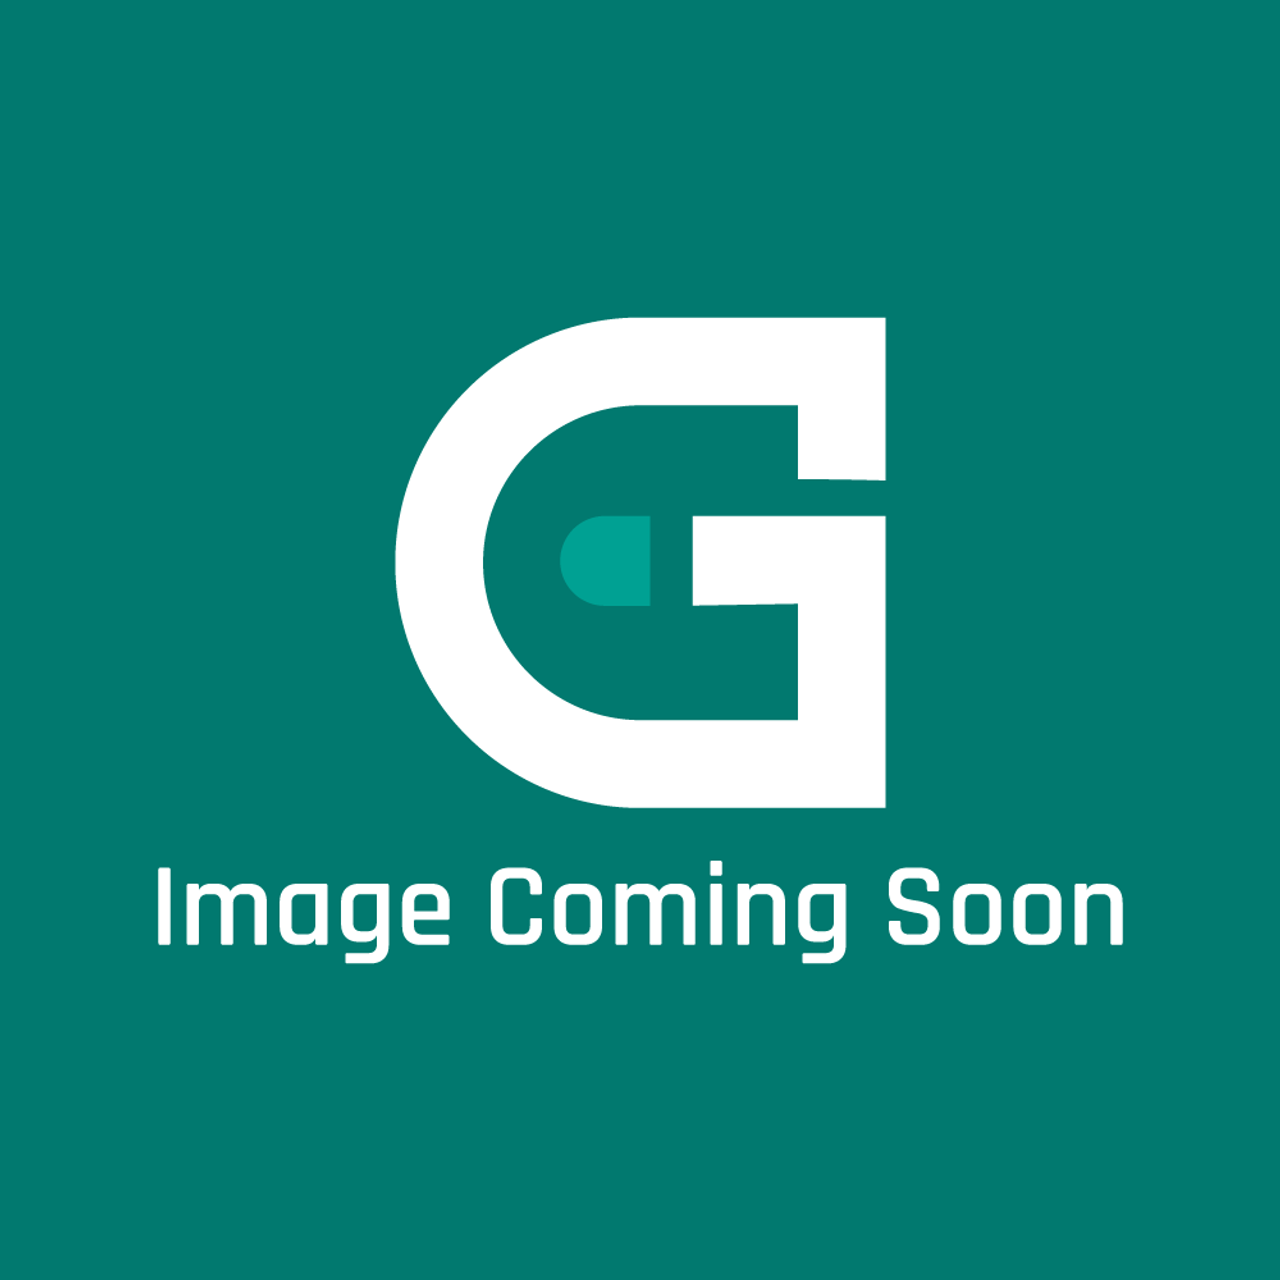 AGA Marvel A065990 - Grill Door And Heat Shield - Stainless S - Image Coming Soon!